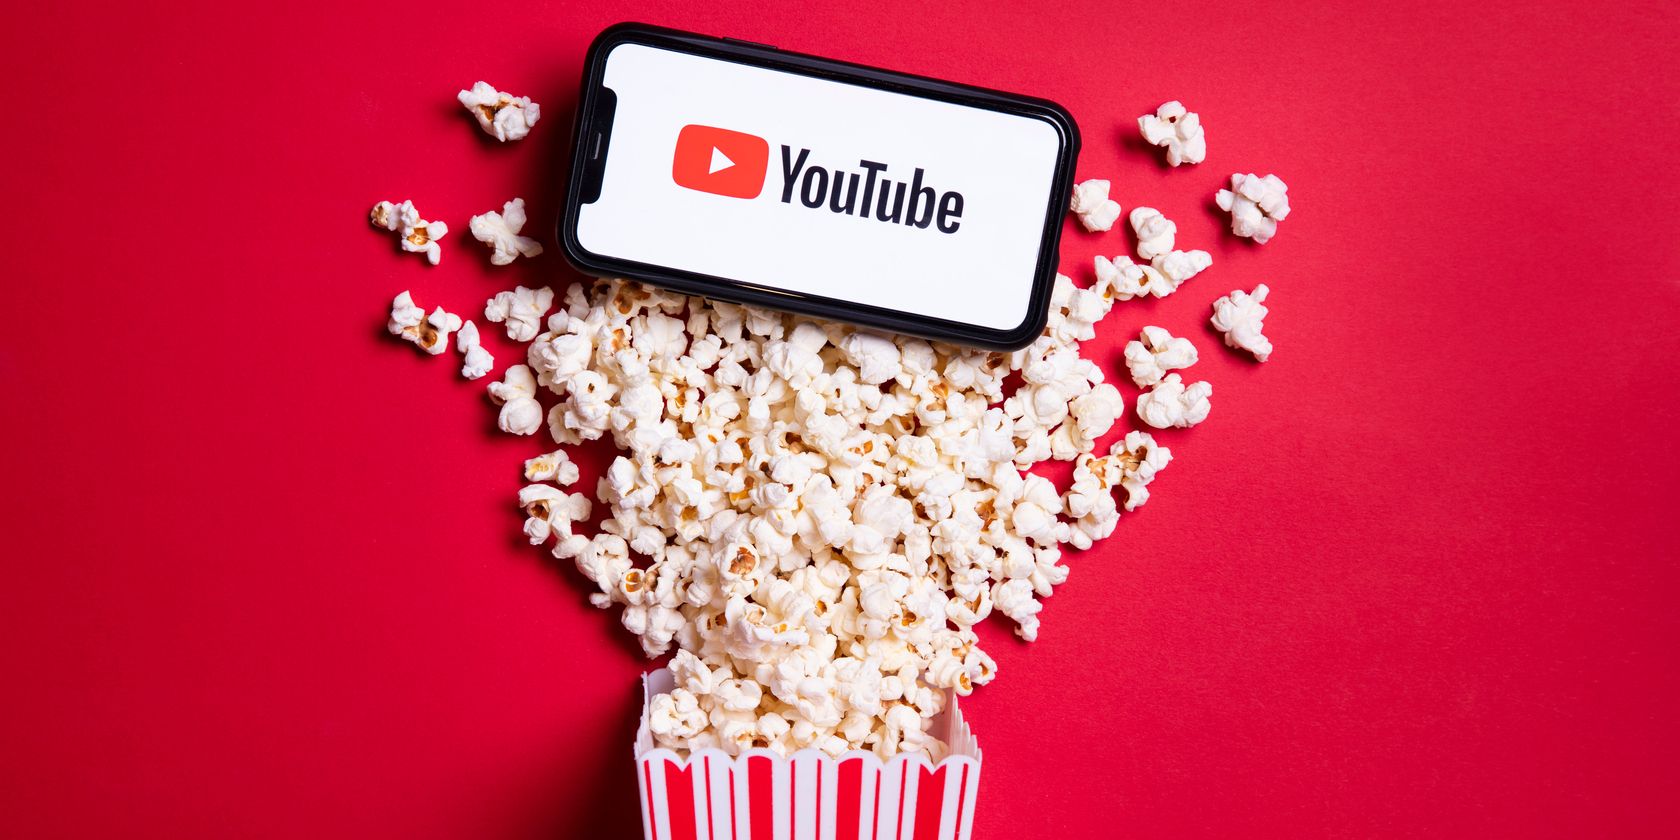 How to Stop YouTube Channels from Showing Up in Your Feed